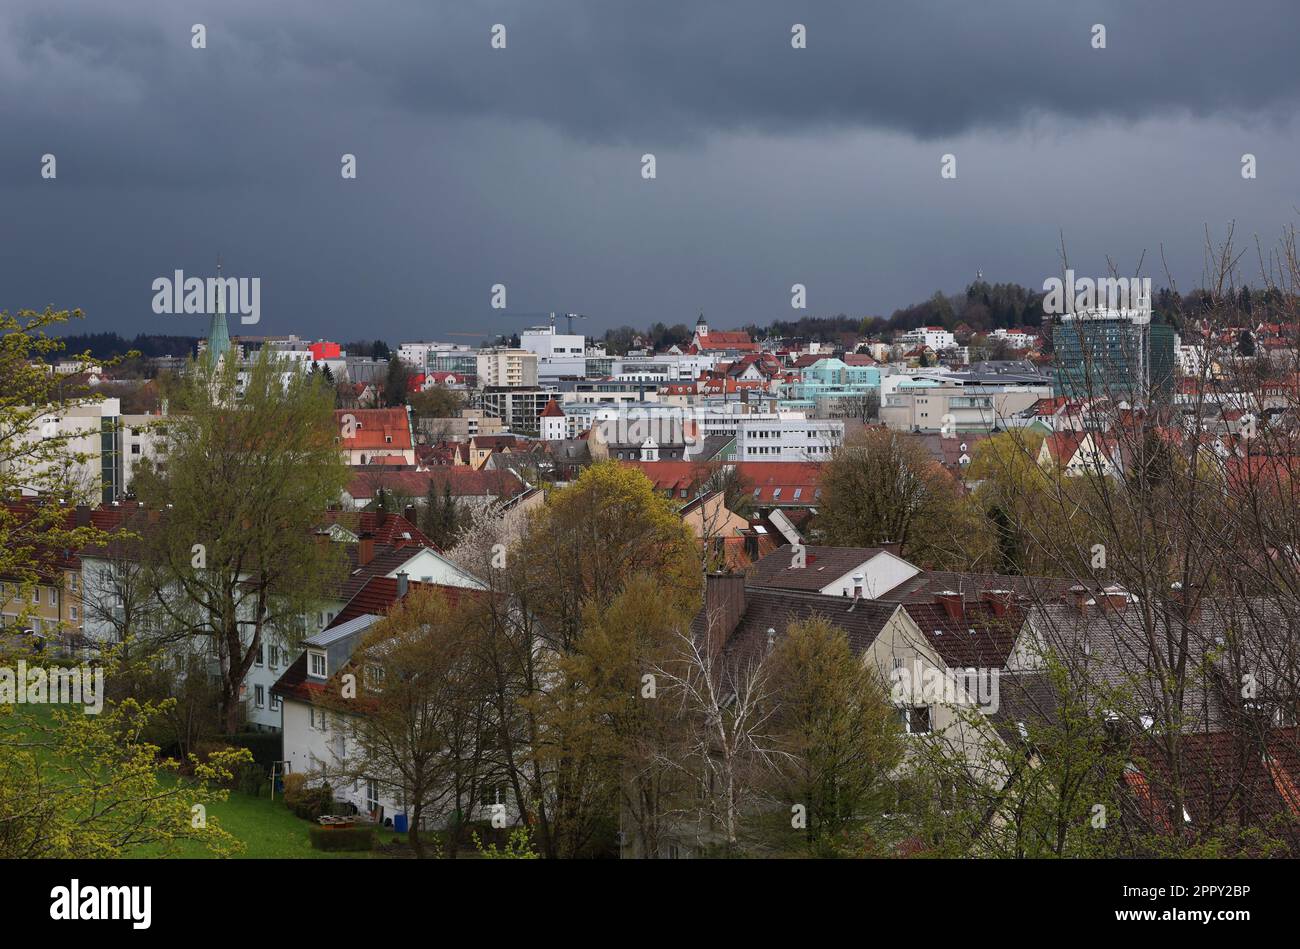 Kempten, Germany. 25th Apr, 2023. Local view of Kempten in the Allgäu region. Two young Syrians have planned an Islamist attack with an explosive belt, according to investigations. Police arrest one in Hamburg and his brother in Allgäu. Credit: Karl-Josef Hildenbrand/dpa/Alamy Live News Stock Photo